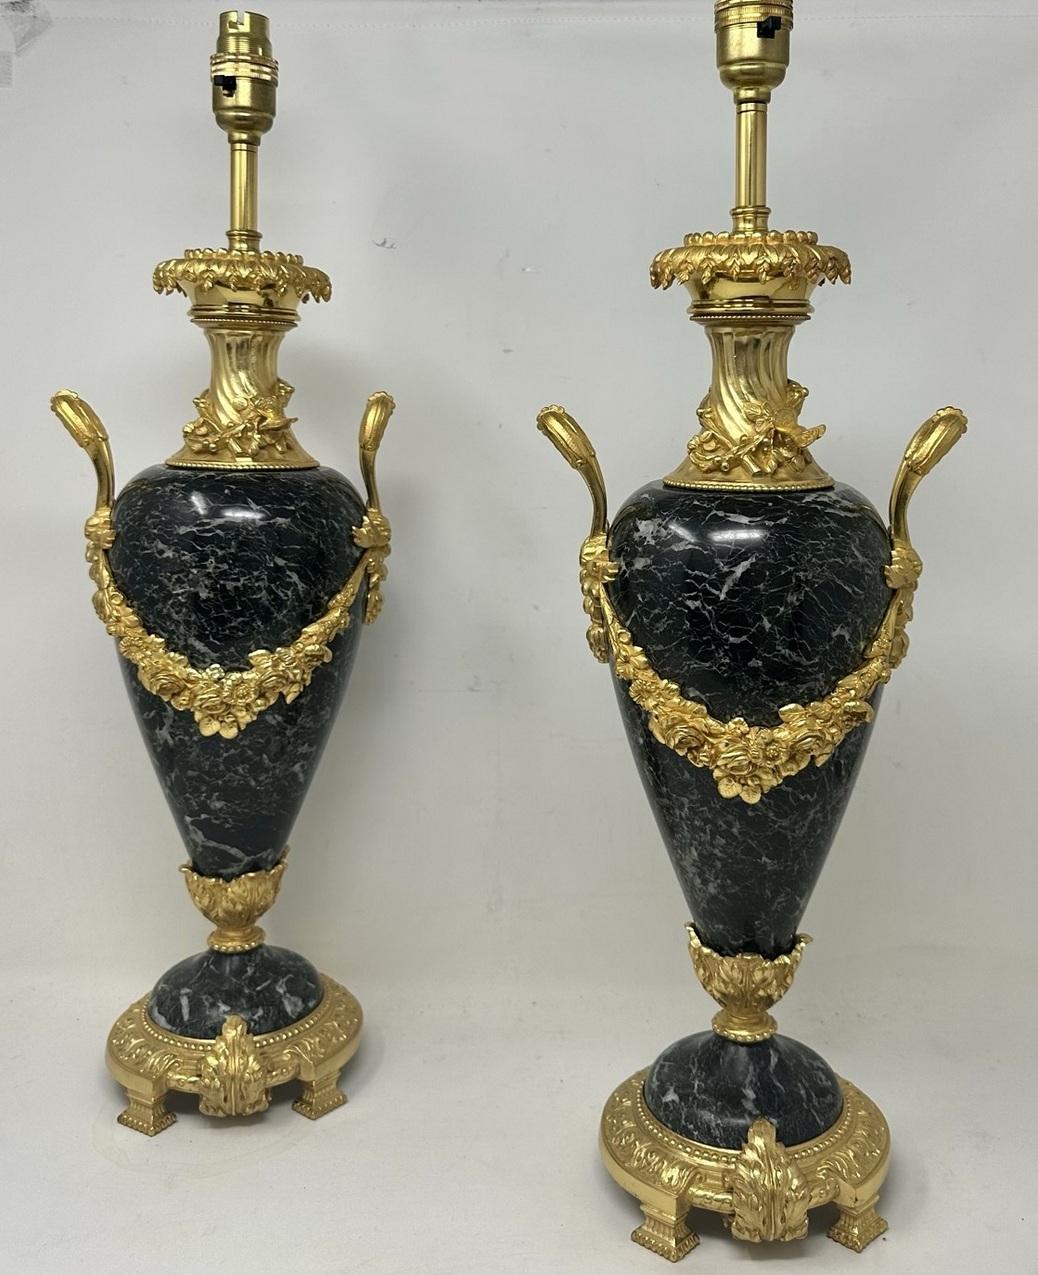 An Exceptionally Fine Pair of heavy gauge French Verde Antico Marble and Ormolu Mounted Urns, now converted to a Pair of Electric Table Lamps of generous proportions, mid to late Nineteenth Century. 

The main oviform bodies with central chisel